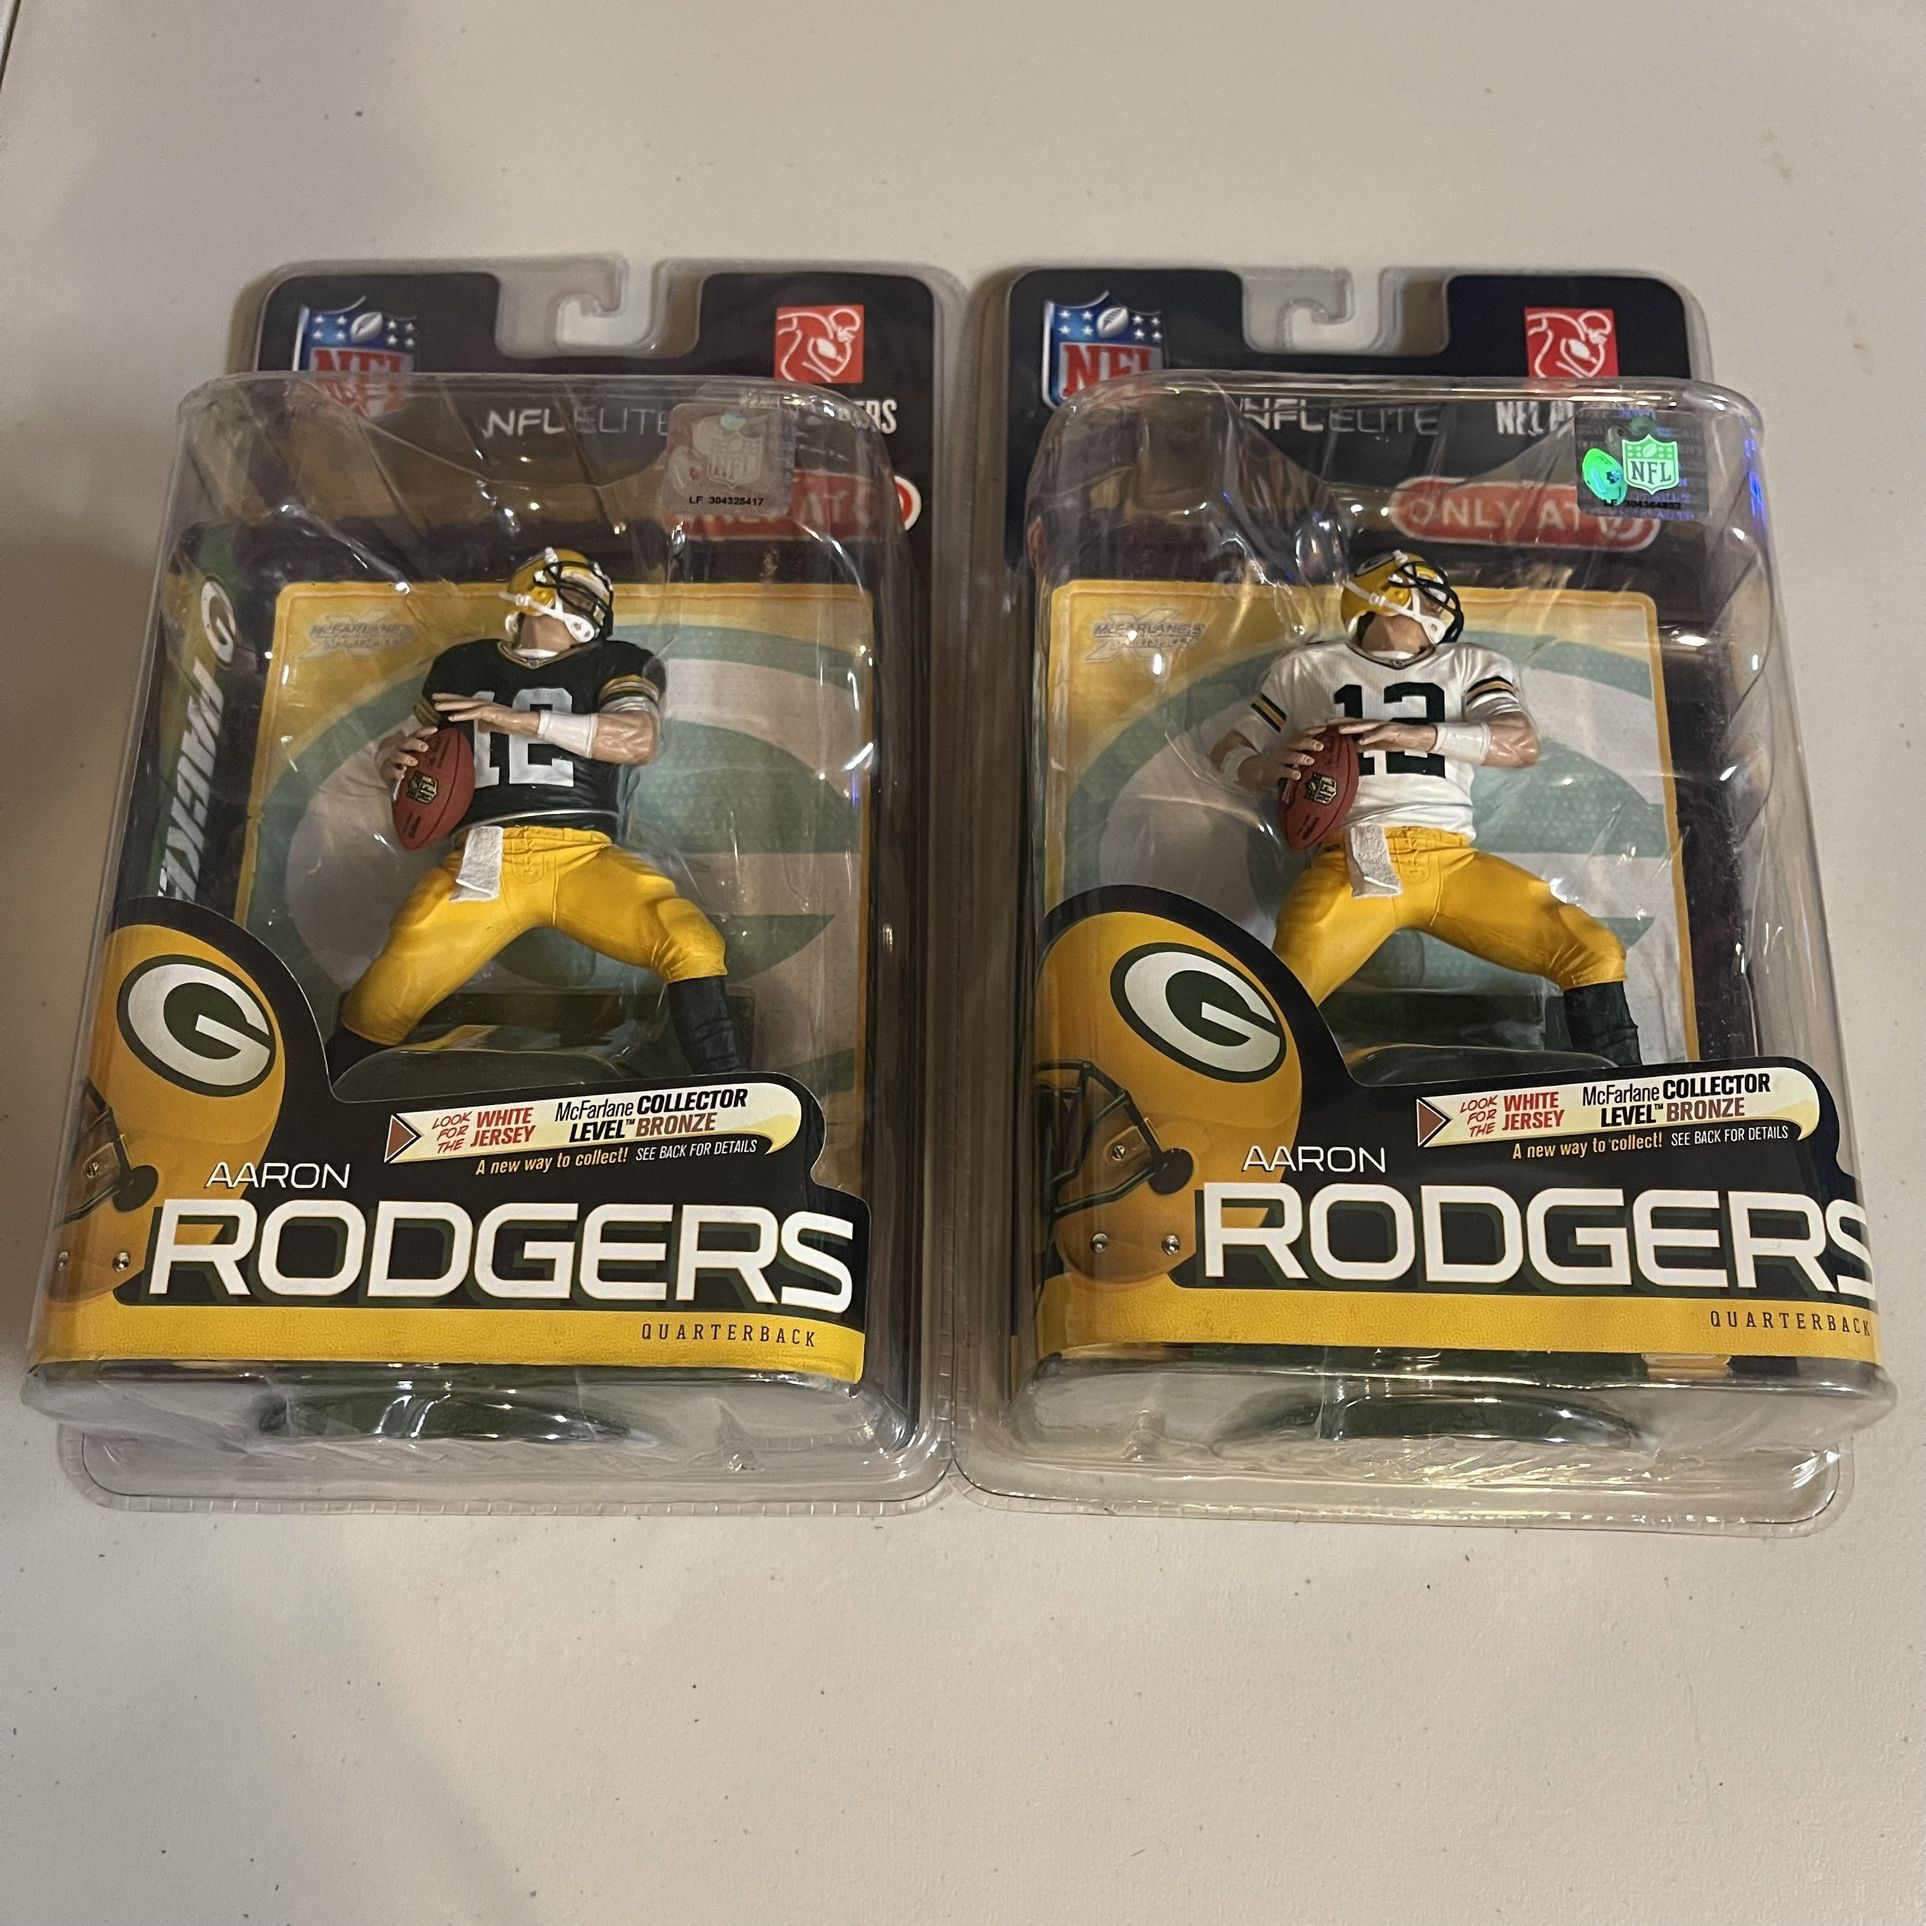 McFarlane Aaron Rodgers NFL Elite Target Exclusive Green & White Jersey  Variant for Sale in Gilbert, AZ - OfferUp